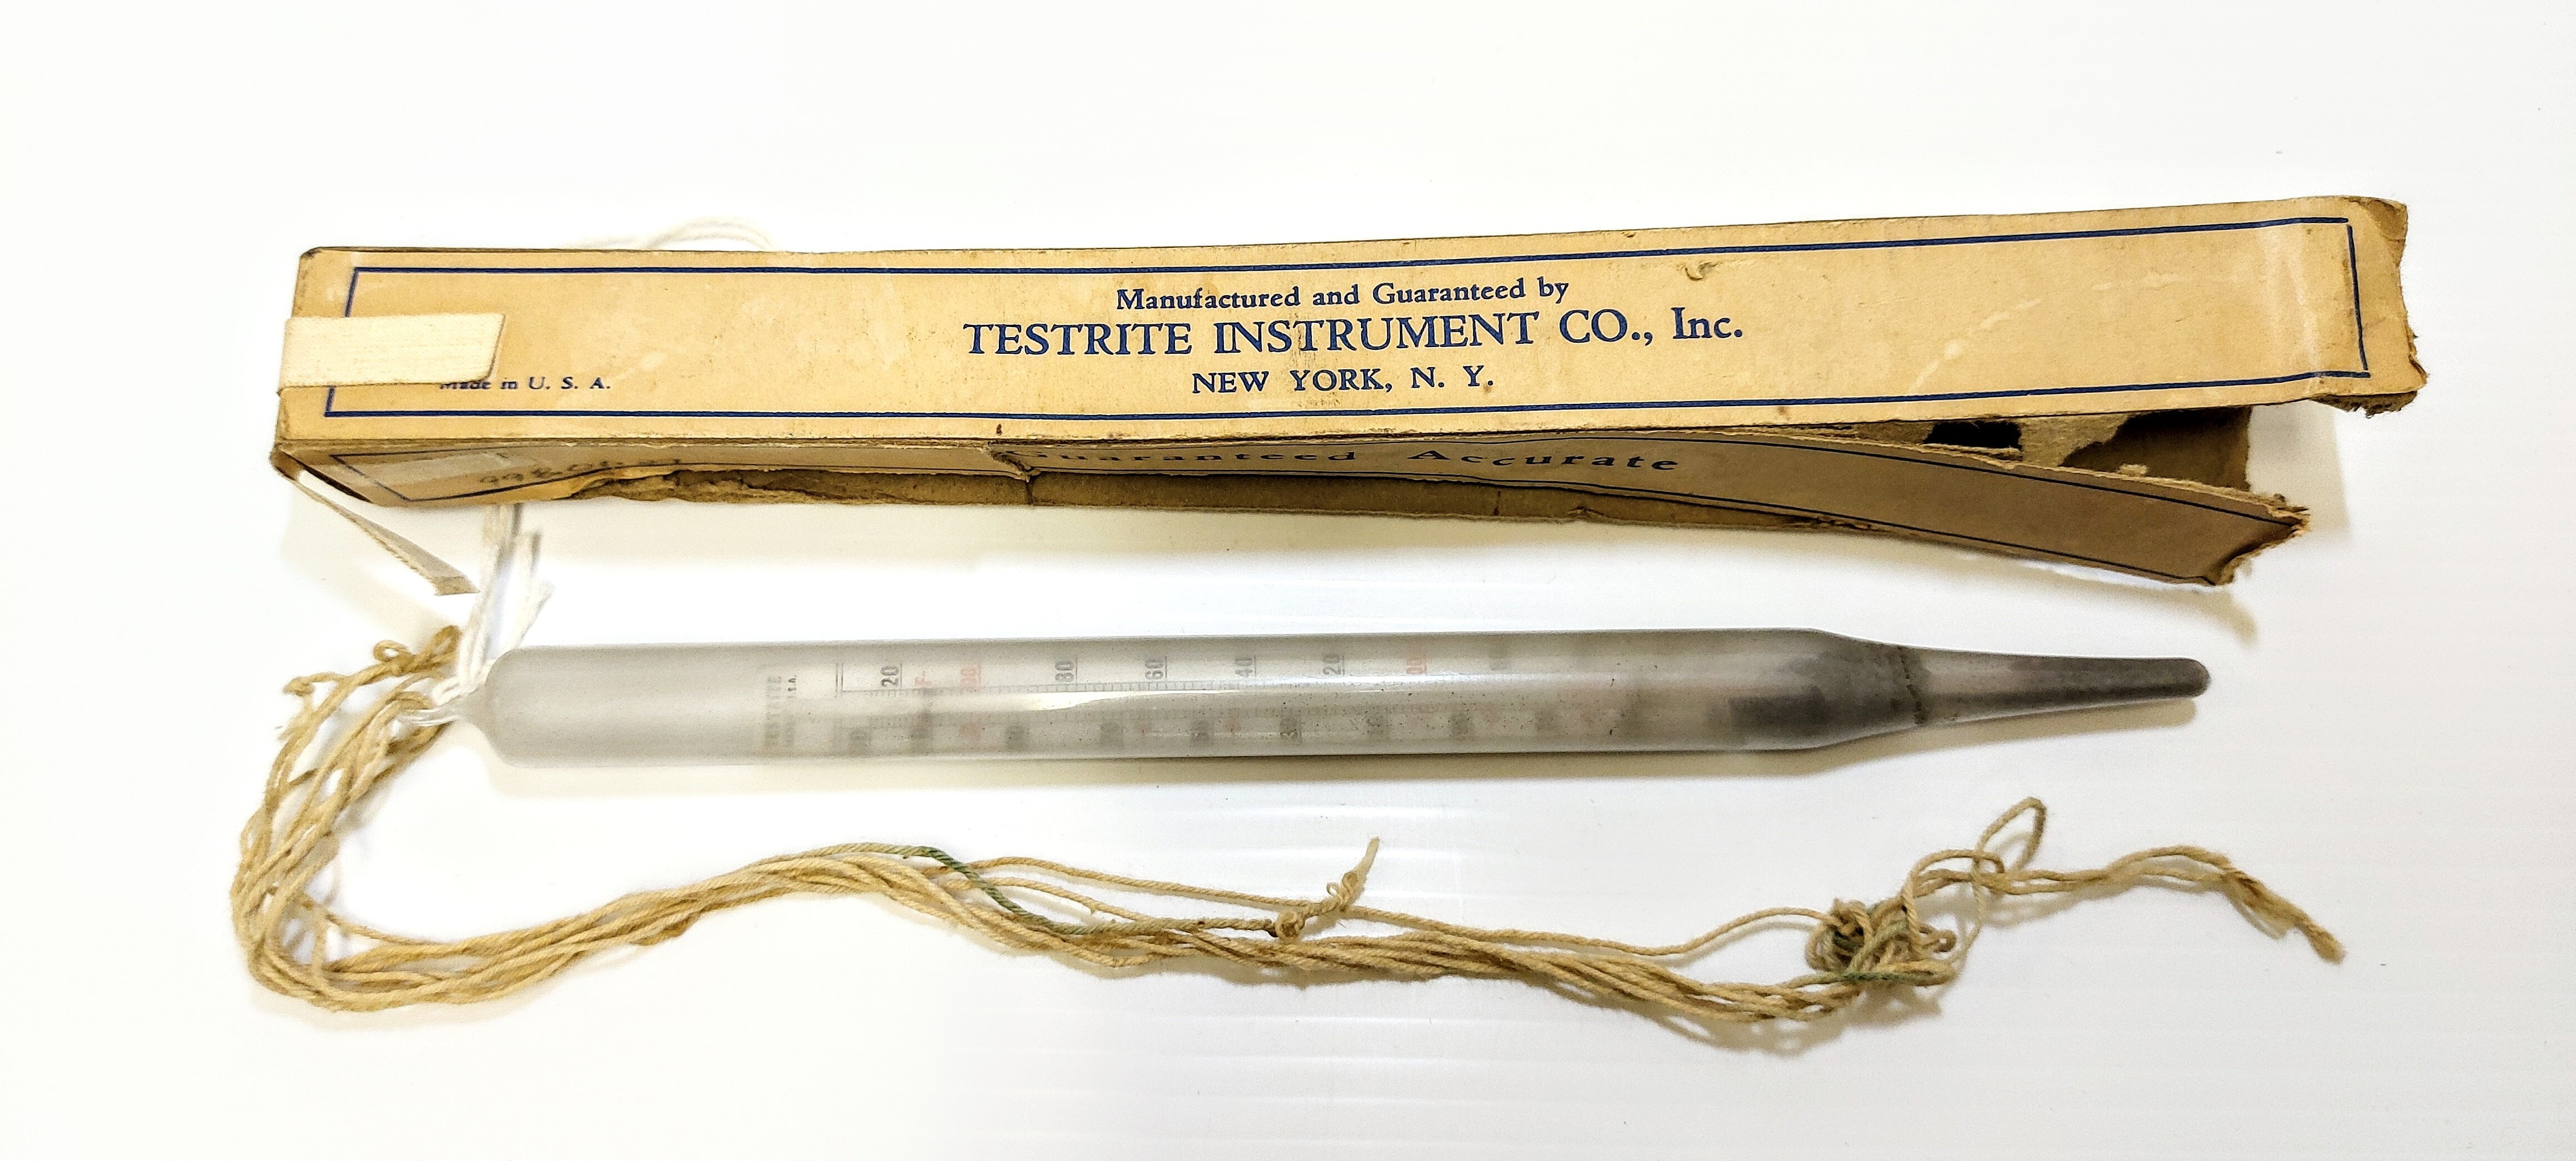 This is a floating Dairy Thermometer. Made in New York, this thermometer gauges temperature with special markings that notate the various stages of milk products. For example, it notates "Cheese" at 85° "pasteurizing" at 165° and "Churning" at 62°. Precise temperatures are very important in producing quality dairy products and this thermometer is labelled as "Guaranteed Accurate". Dairy products were produced throughout the area with notable operations being the Lawrence Ranch,  numerous families in "Buttertown" and  the Newman Farm. 
998.1.27 / Newman, Jack & Pearl